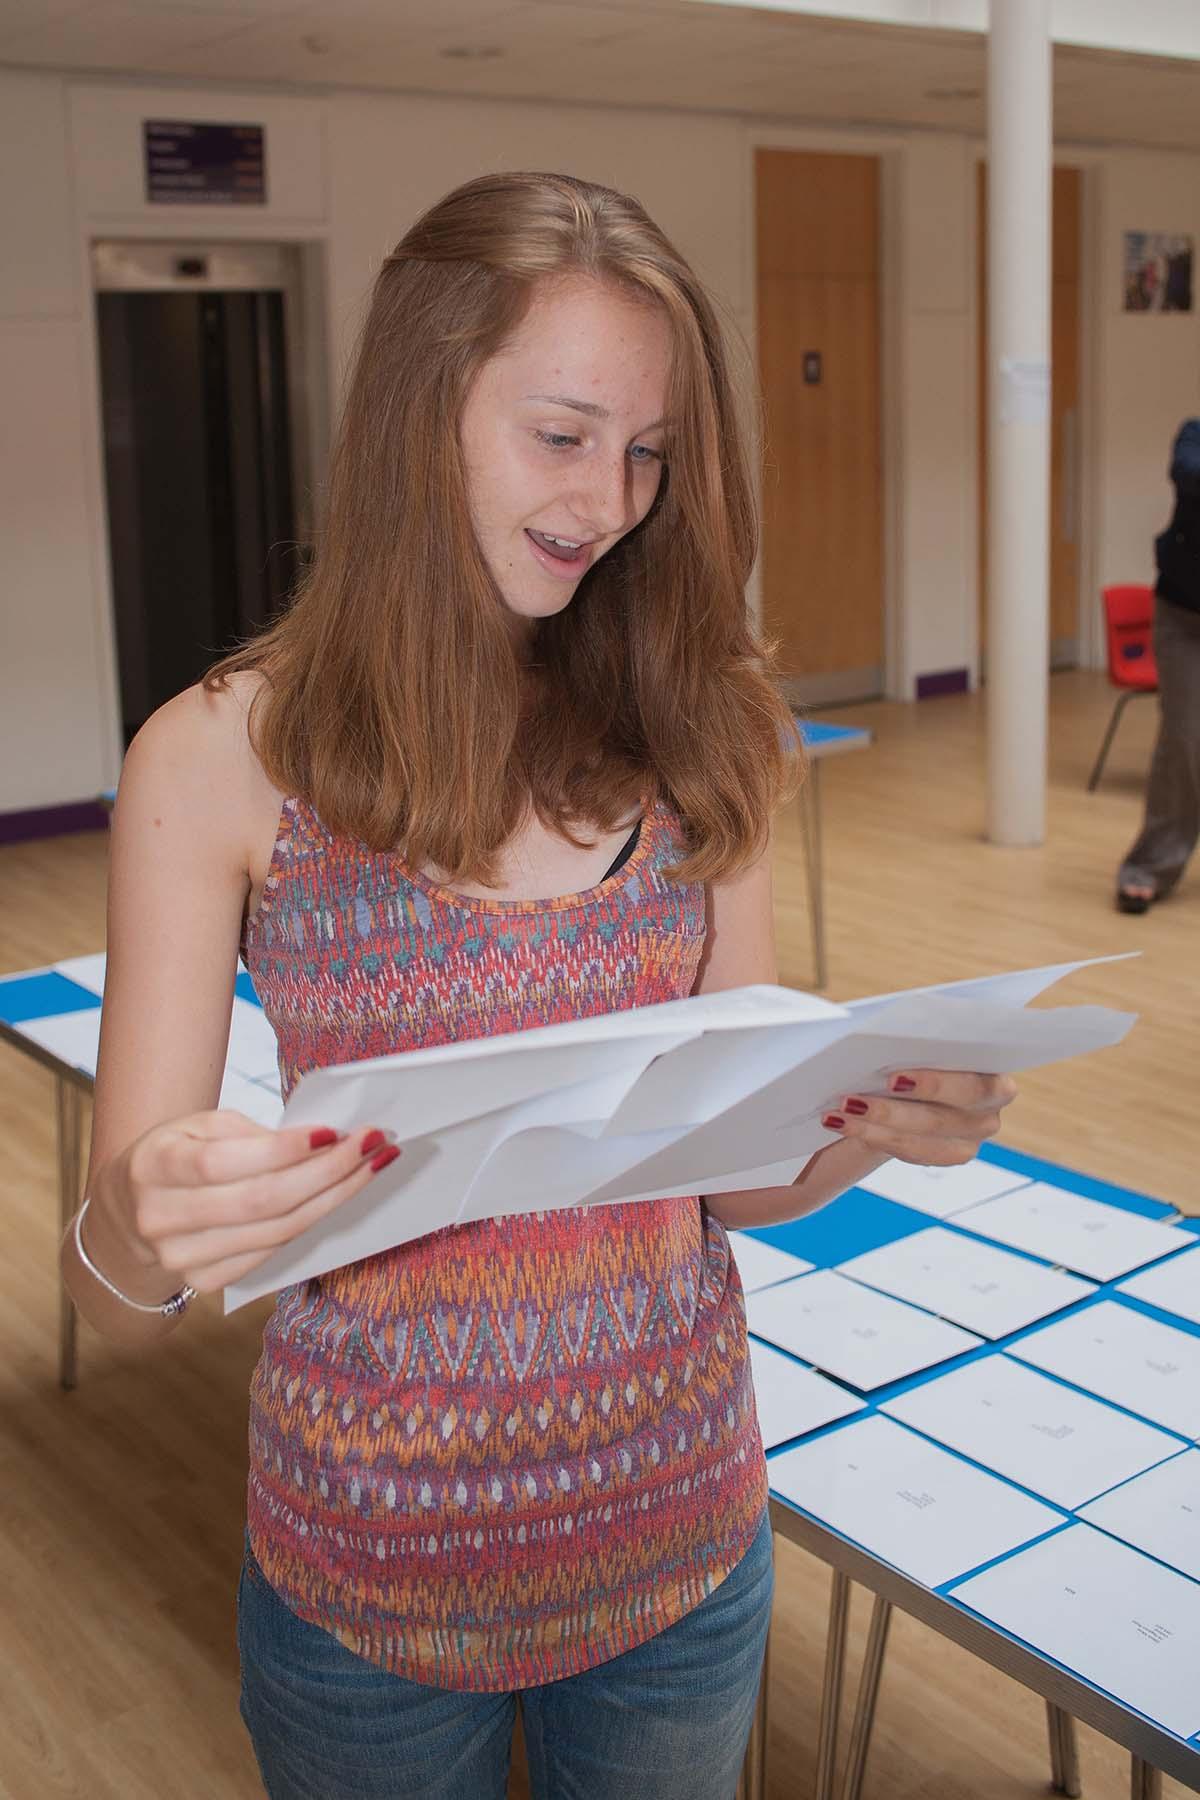 GCSE Results - Oxford Spires Academy